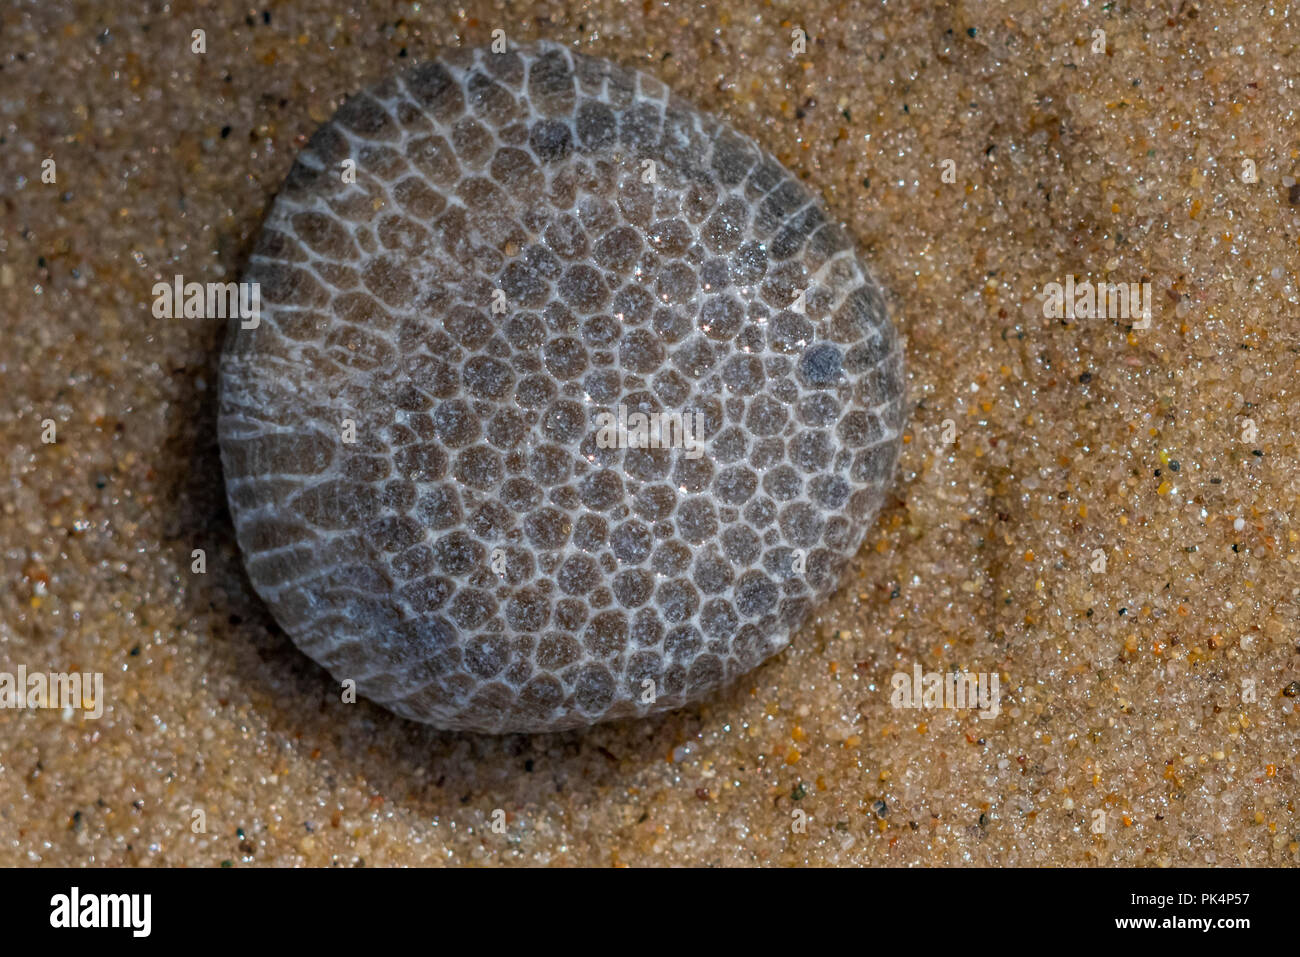 A Charlevoix stone (rock formed from skeletons of Favosite coral or honeycomb coral) found on the beach on Lake Michigan, USA. Stock Photo